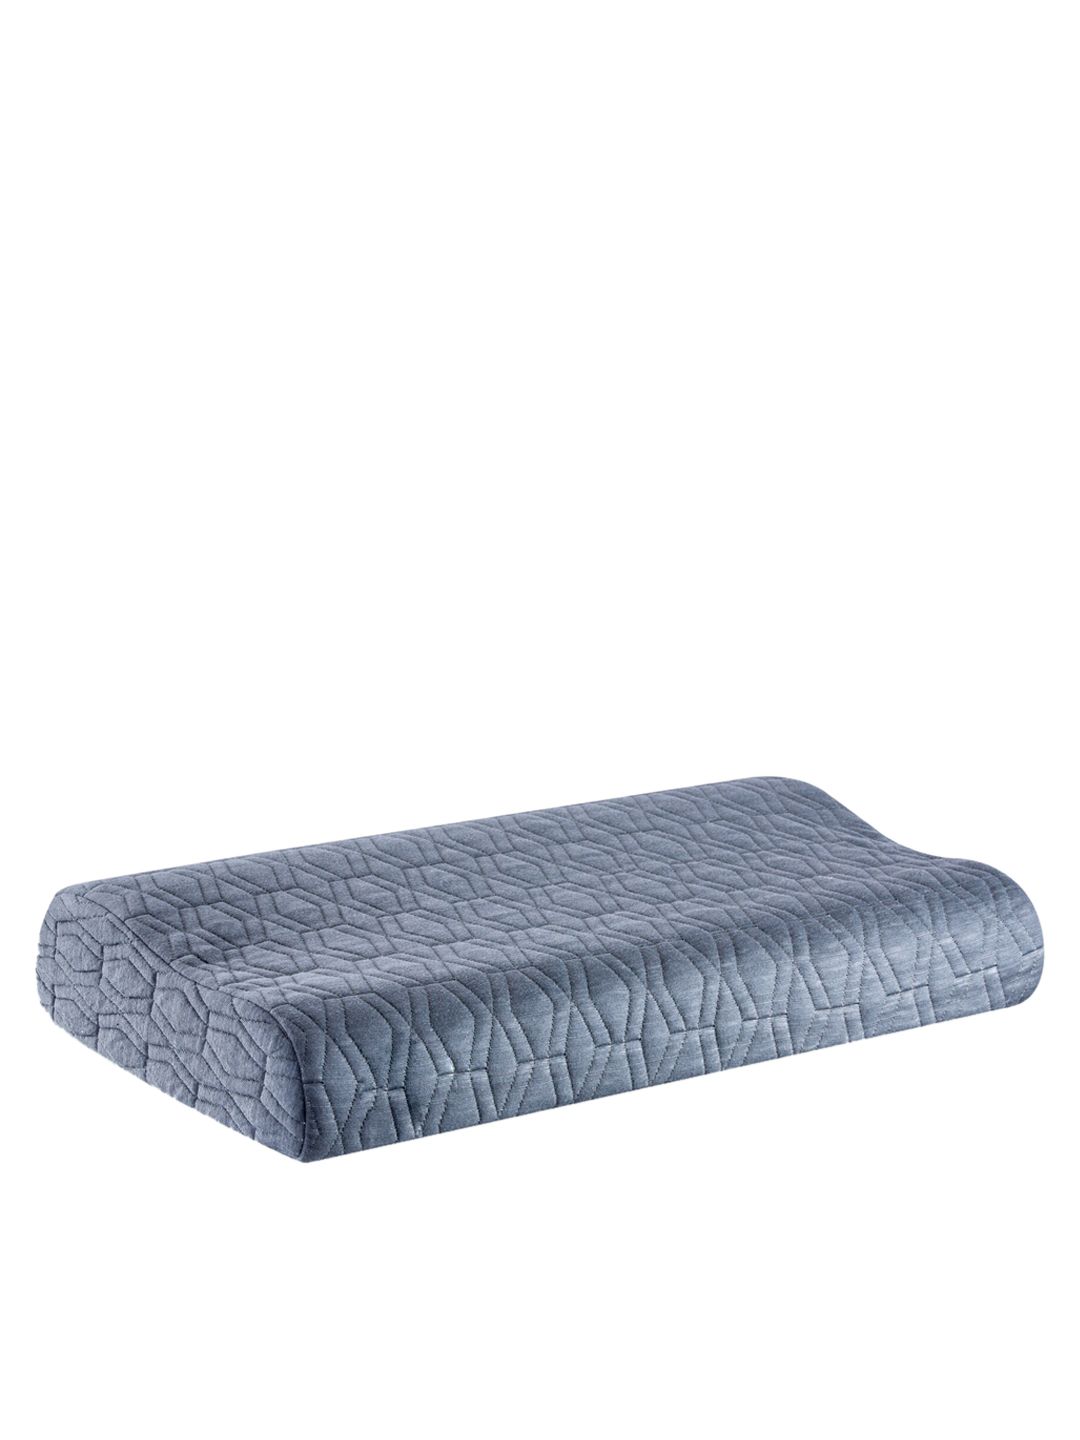 The White Willow Grey Memory Foam Cooling Gel Cervical Bed Pillow Price in India